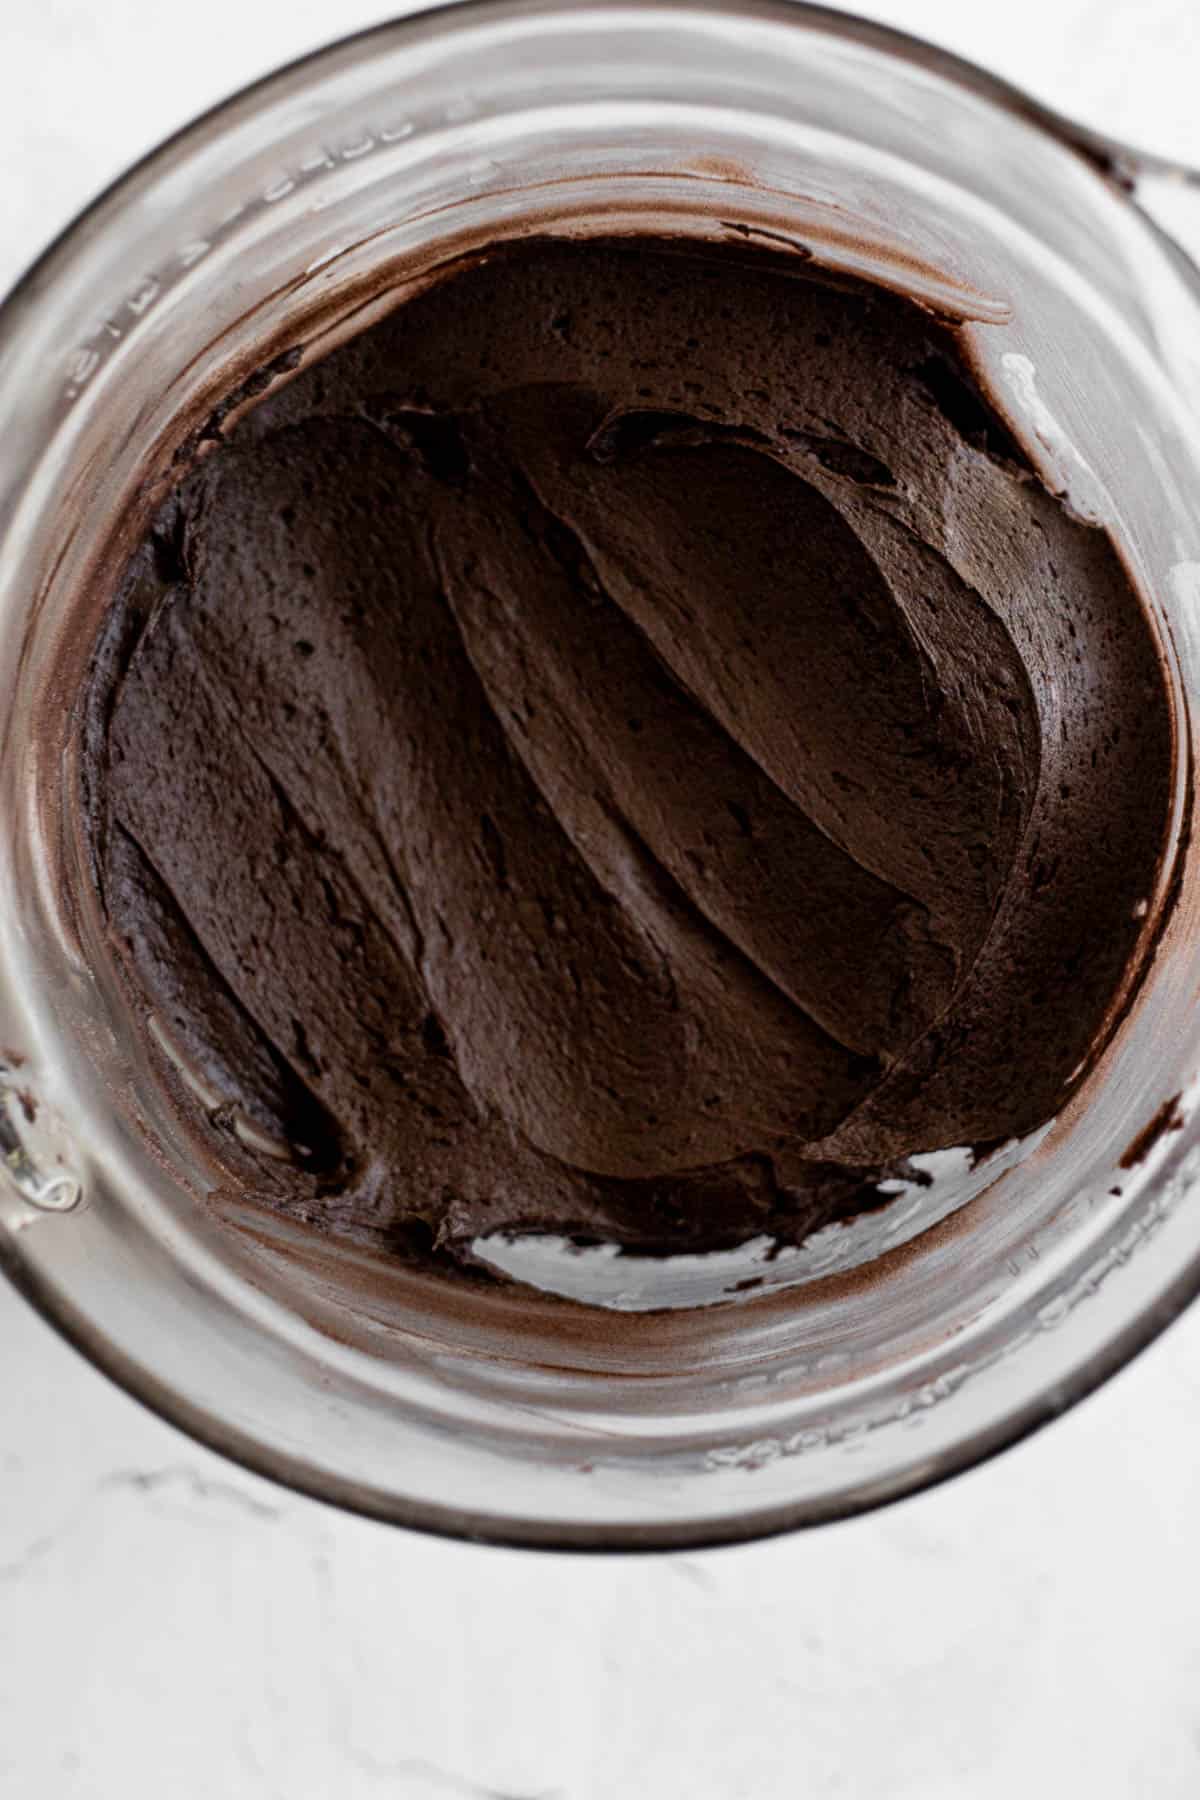 black cocoa buttercream frosting in a glass mixing bowl.